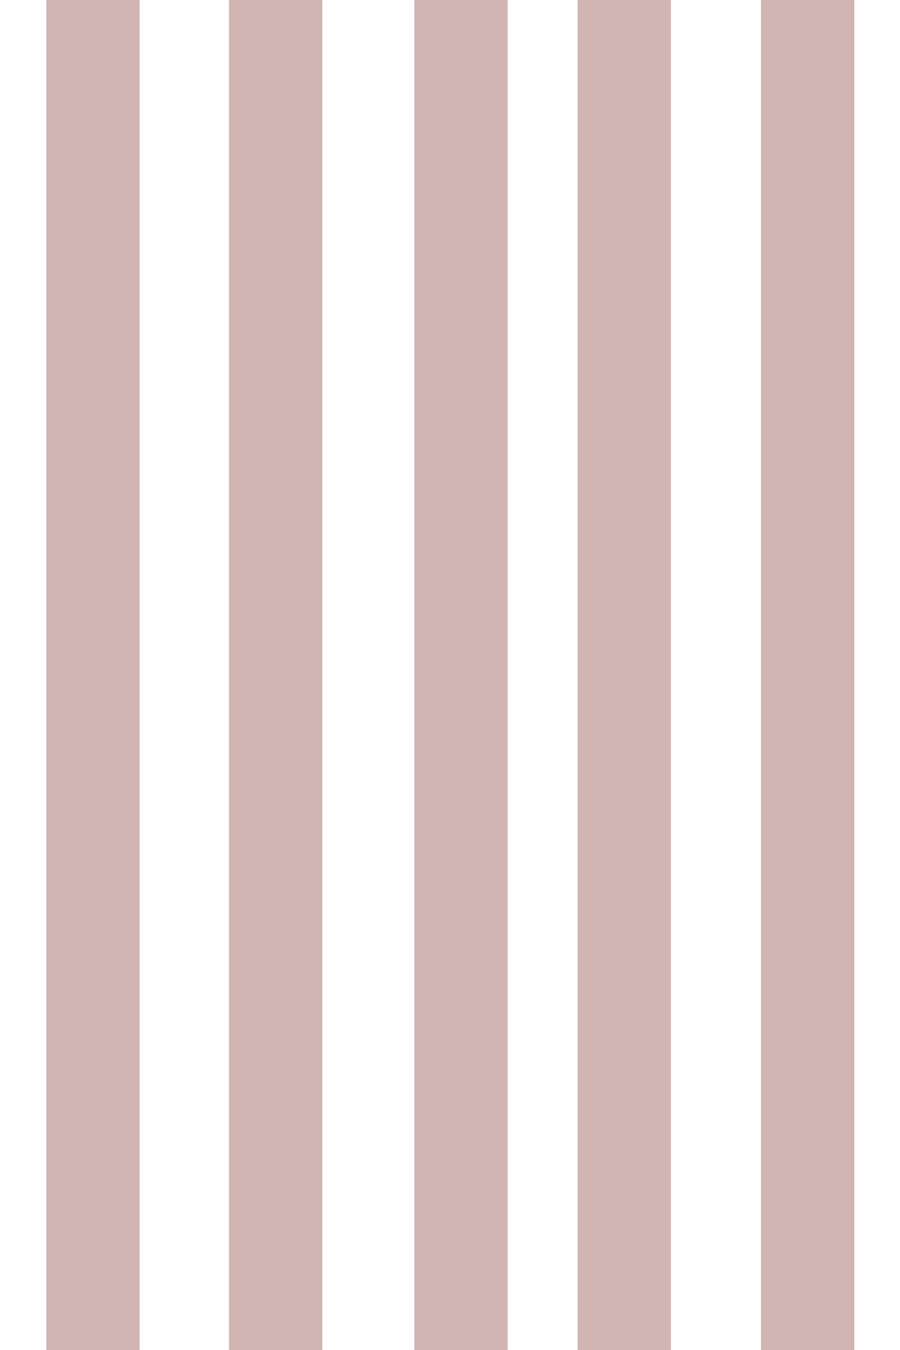 Woolf With Me Fitted Crib Sheet Stripes color_mauve